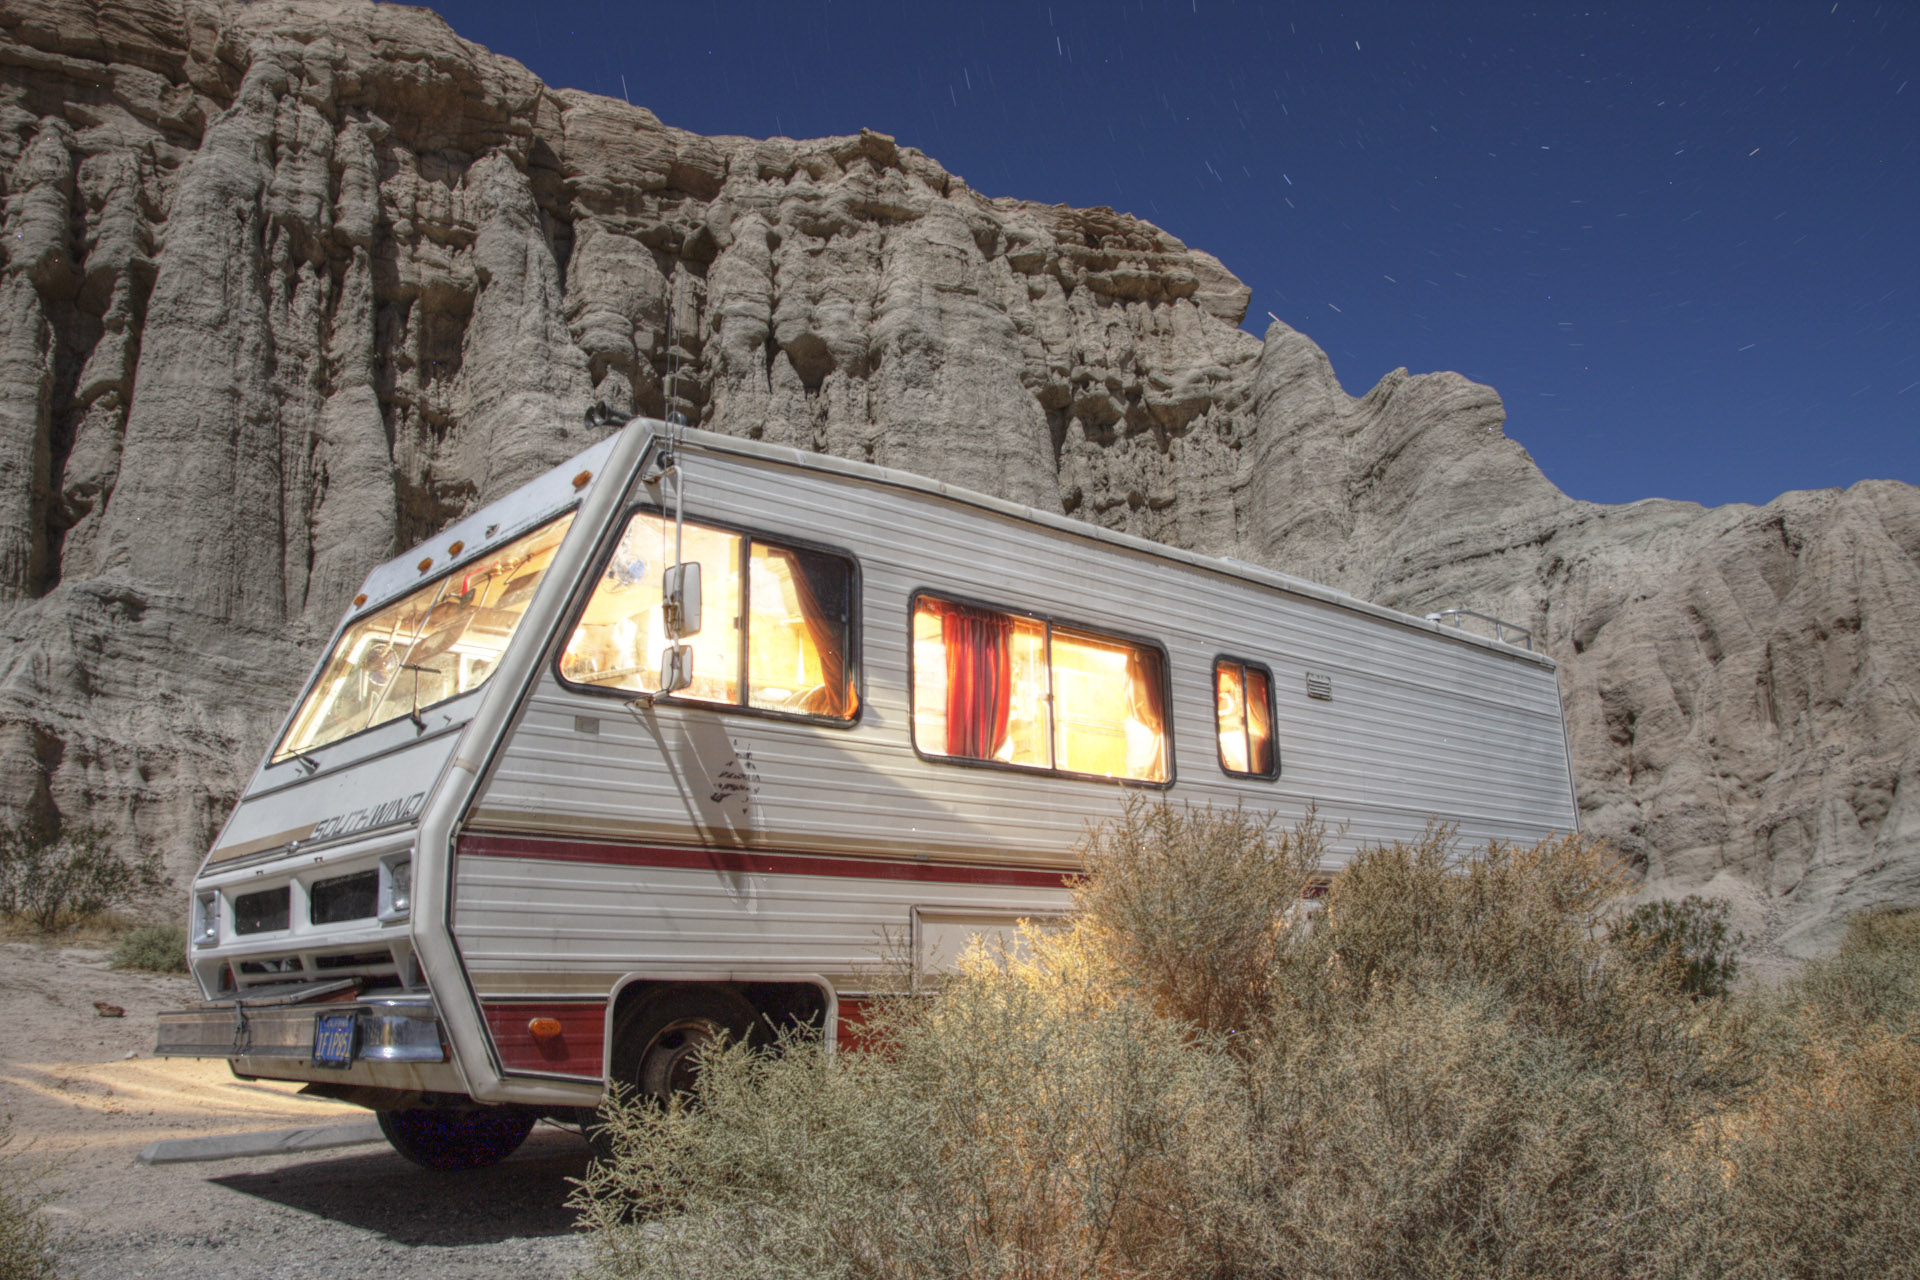 How To Save On RV Traveling Costs